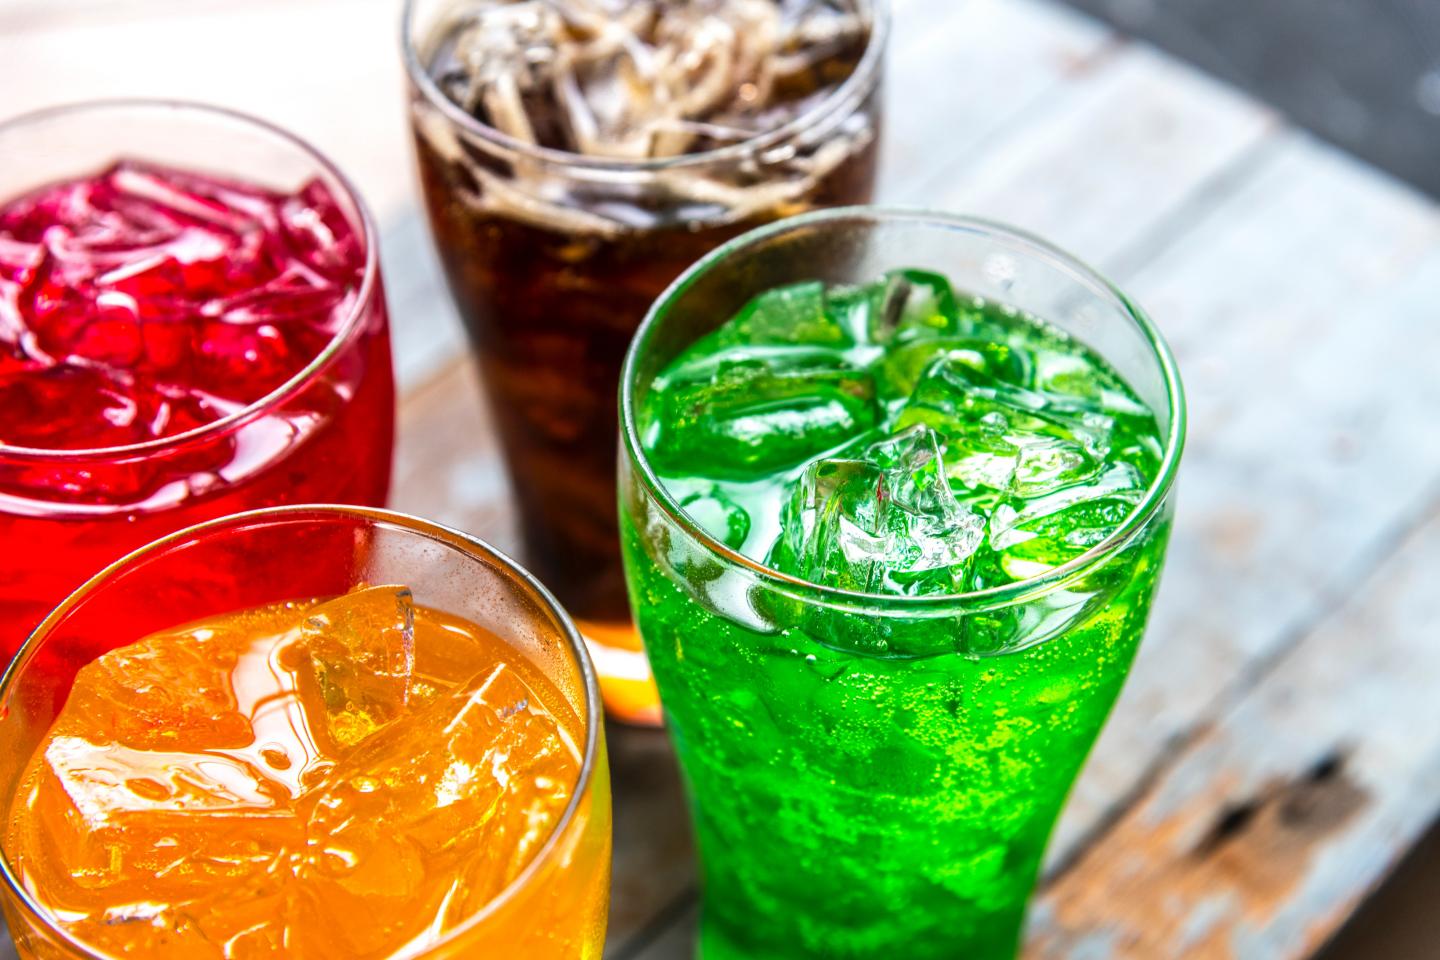 Sugary drinks are bad for the teeth as they feed bacteria in the mouth. Photo/Net